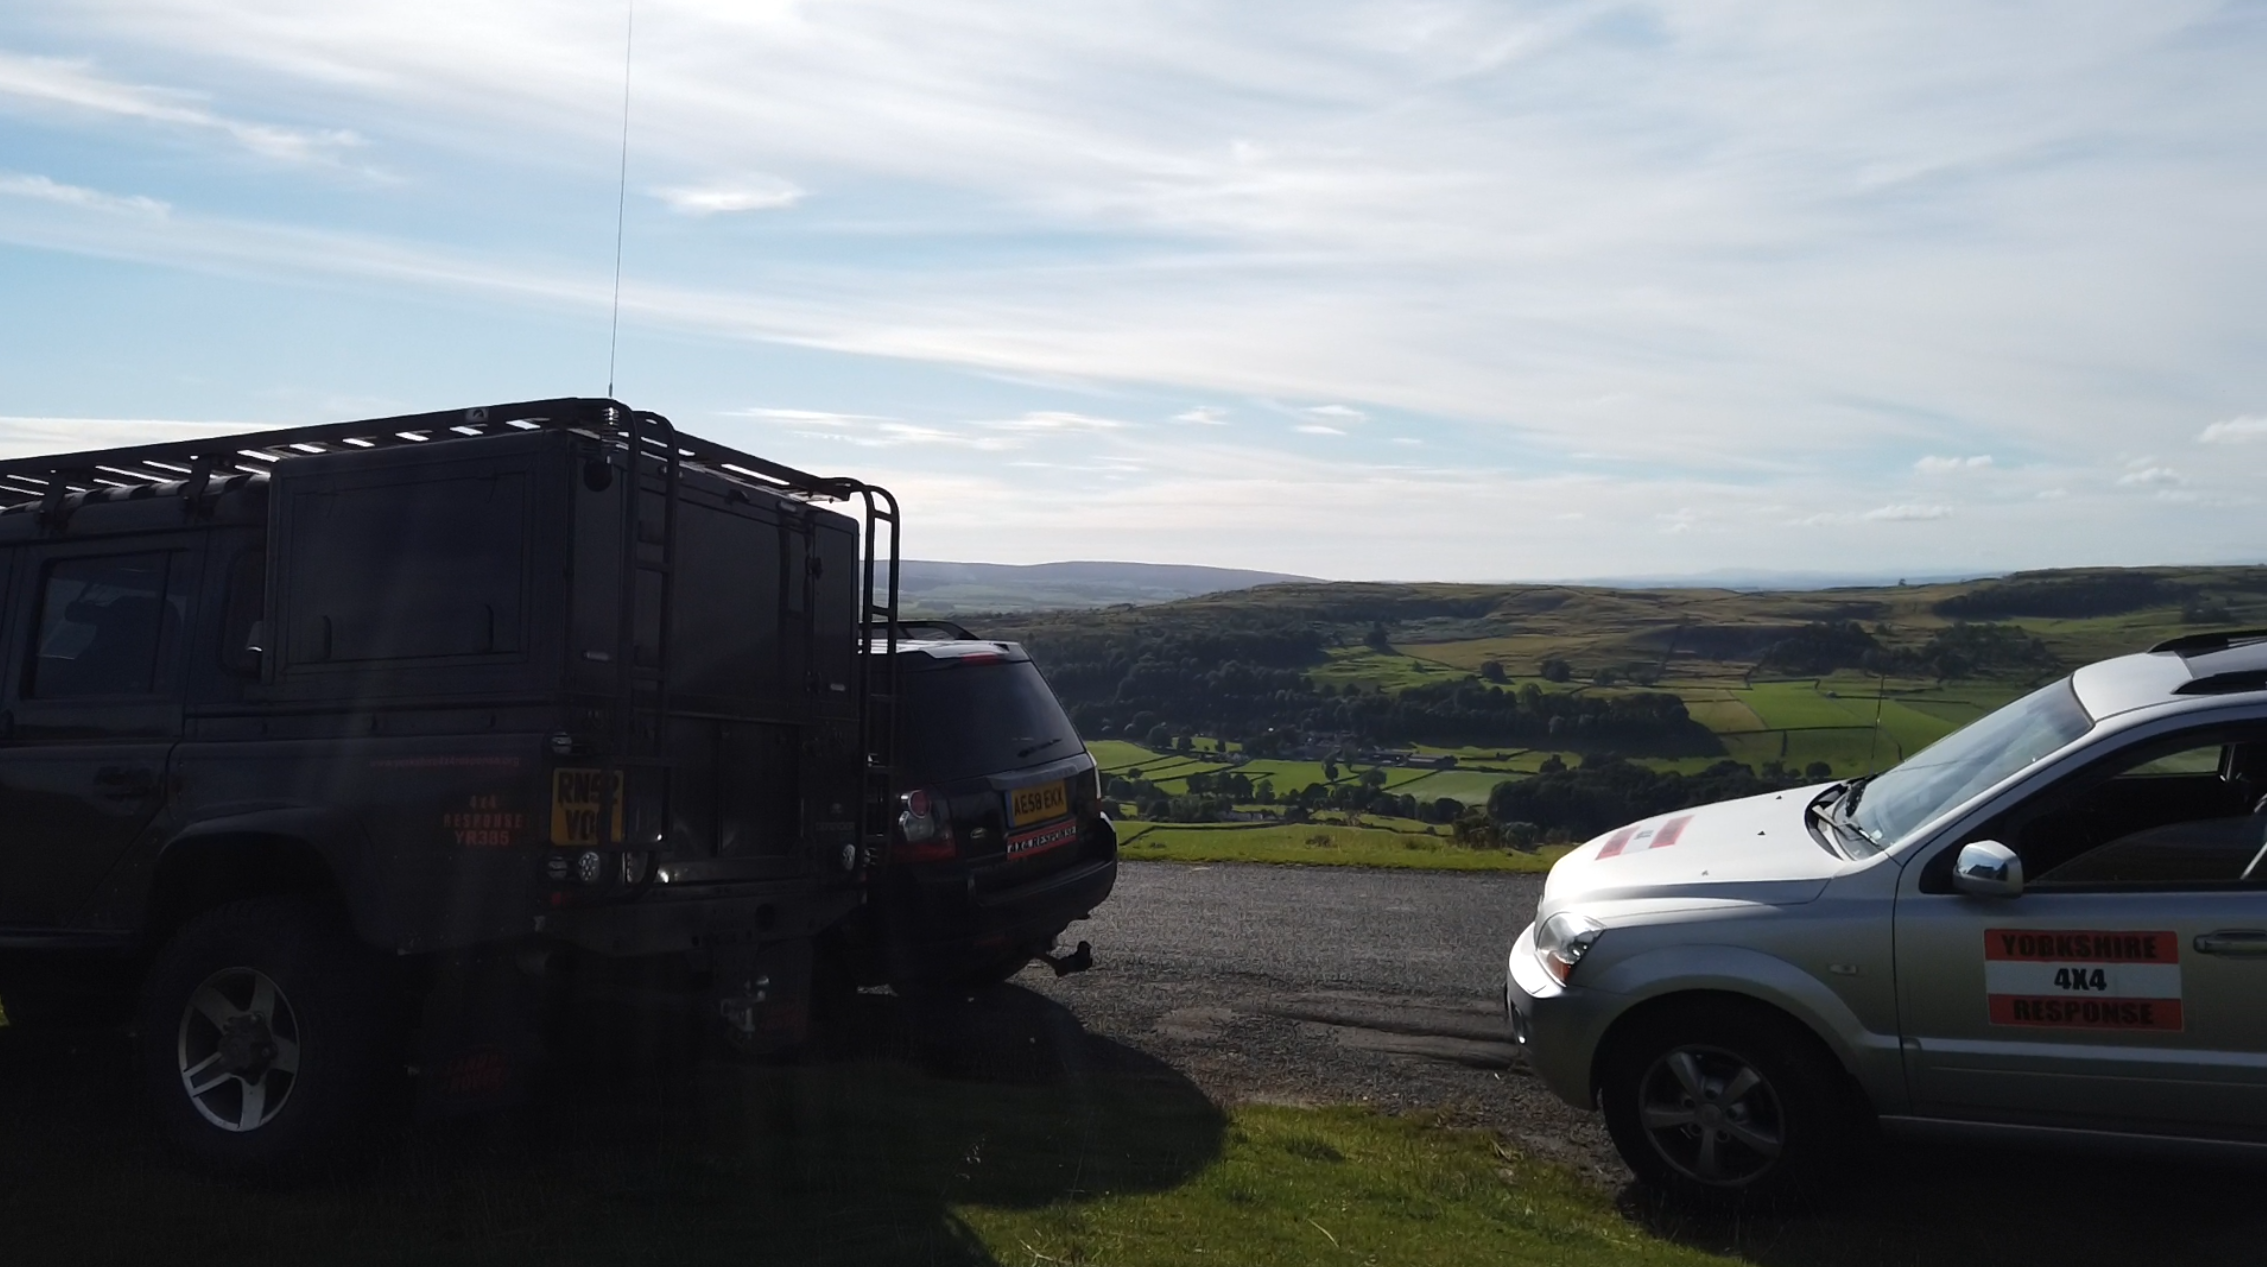 Diary of a 4x4 Responder: Part Five - Dales Festival 2022